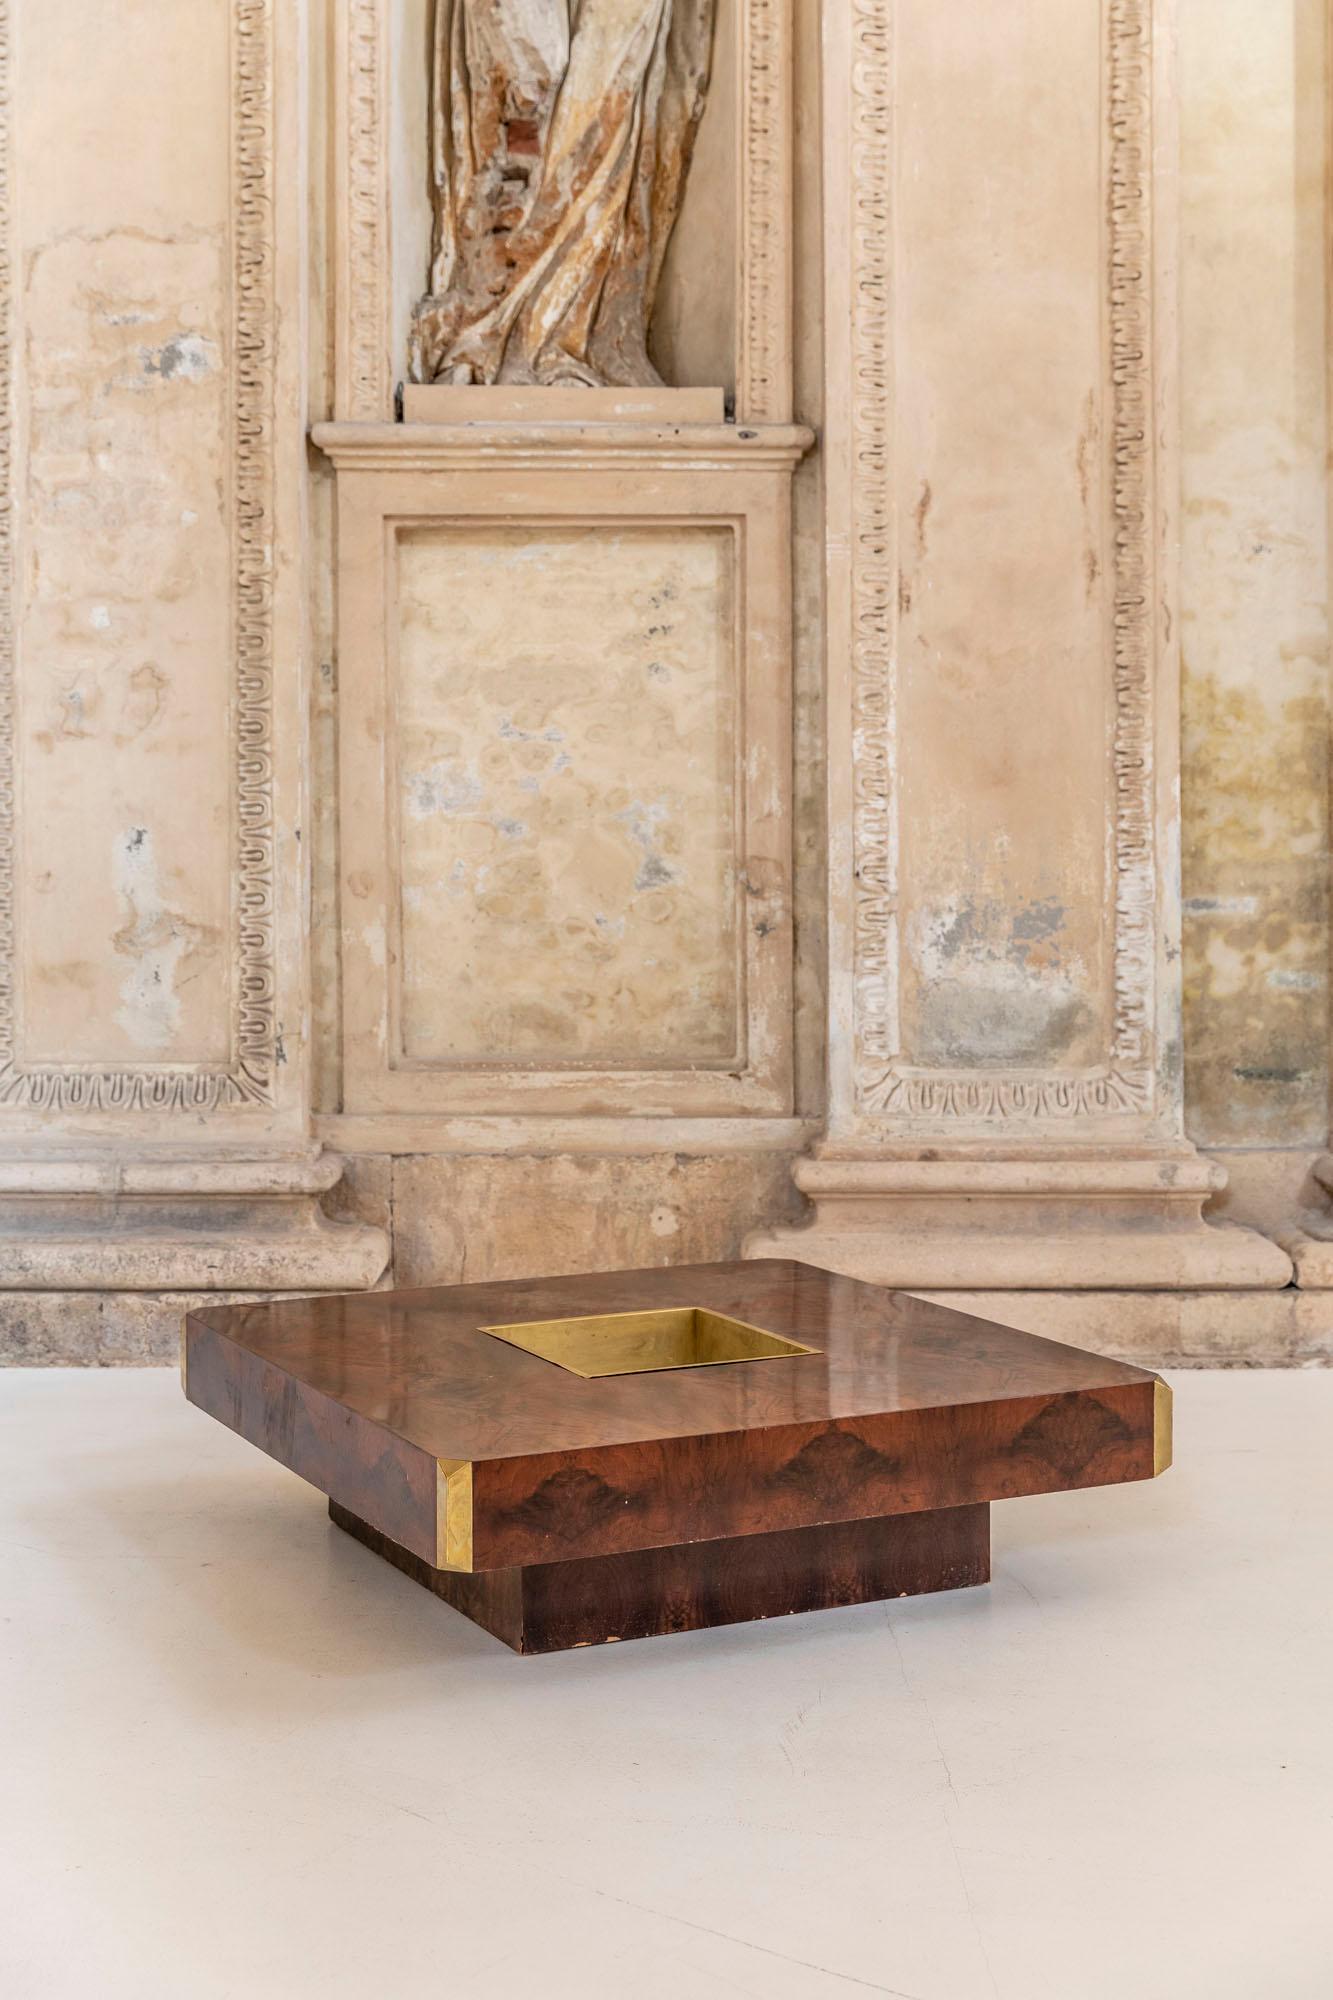 Iconic large squared coffee table attributed to Willy Rizzo.
Burled walnut veneer wood with brass corners and brass bottle holder in the middle.
 